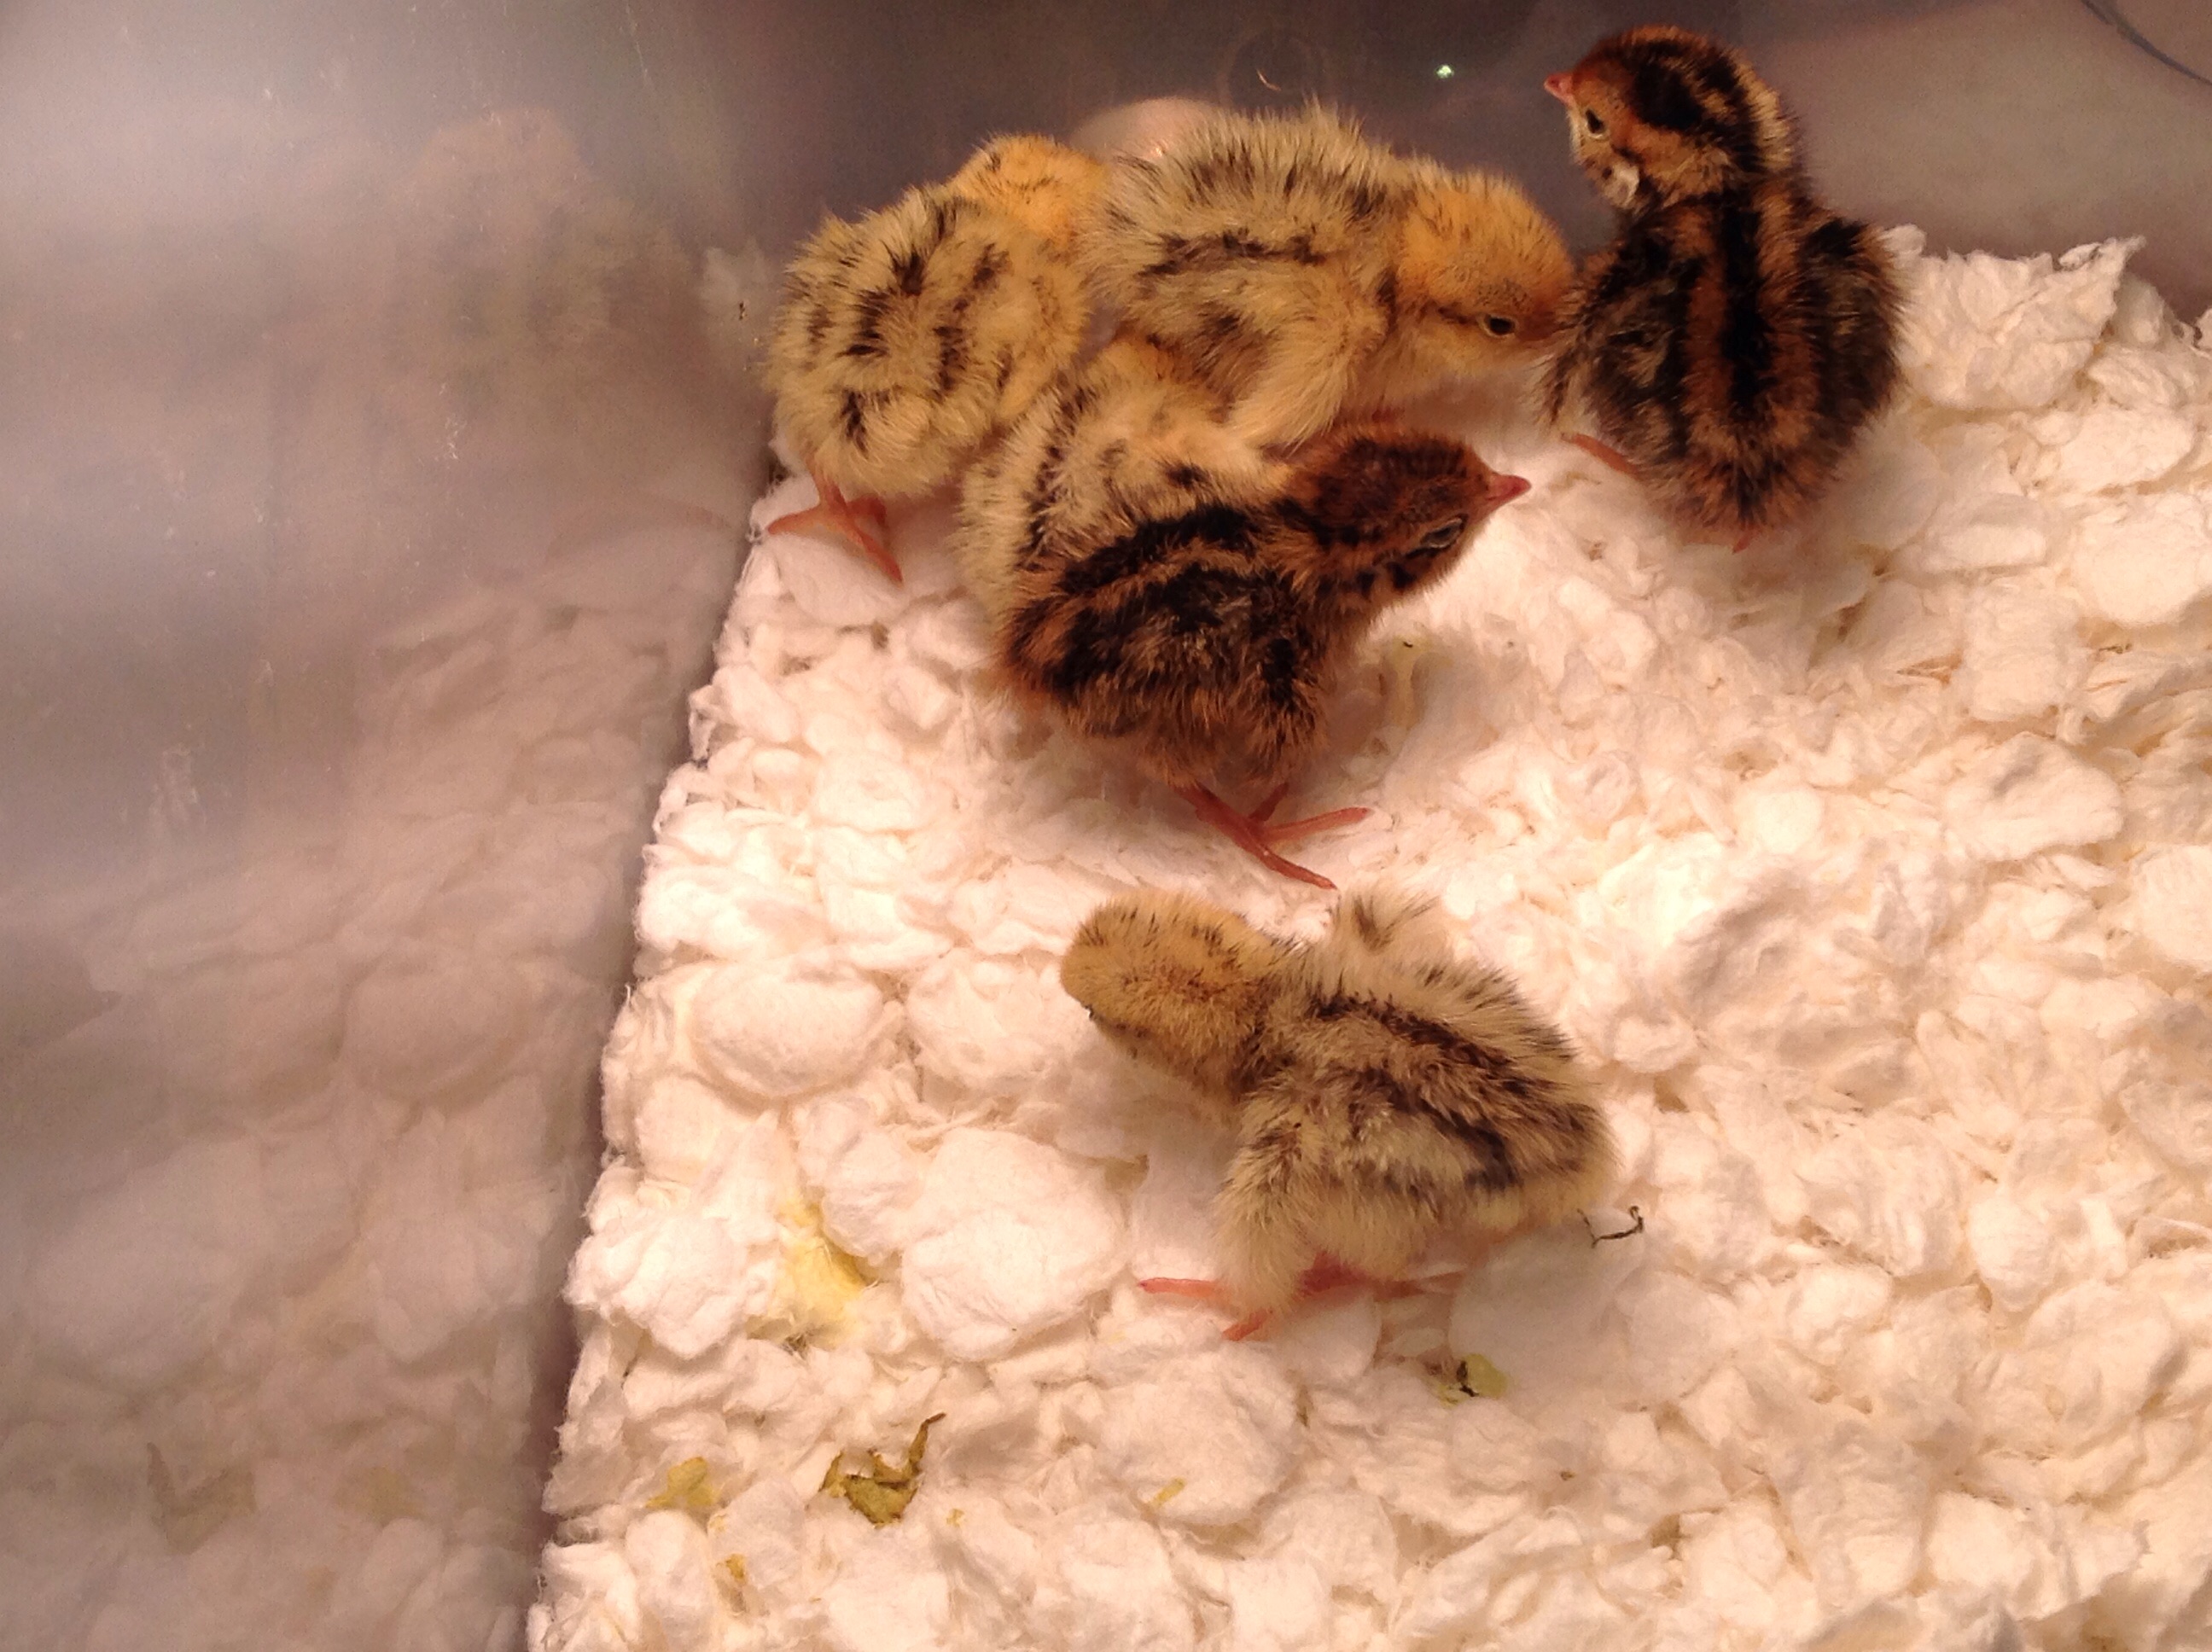 My baby quails, fresh from the incubator!